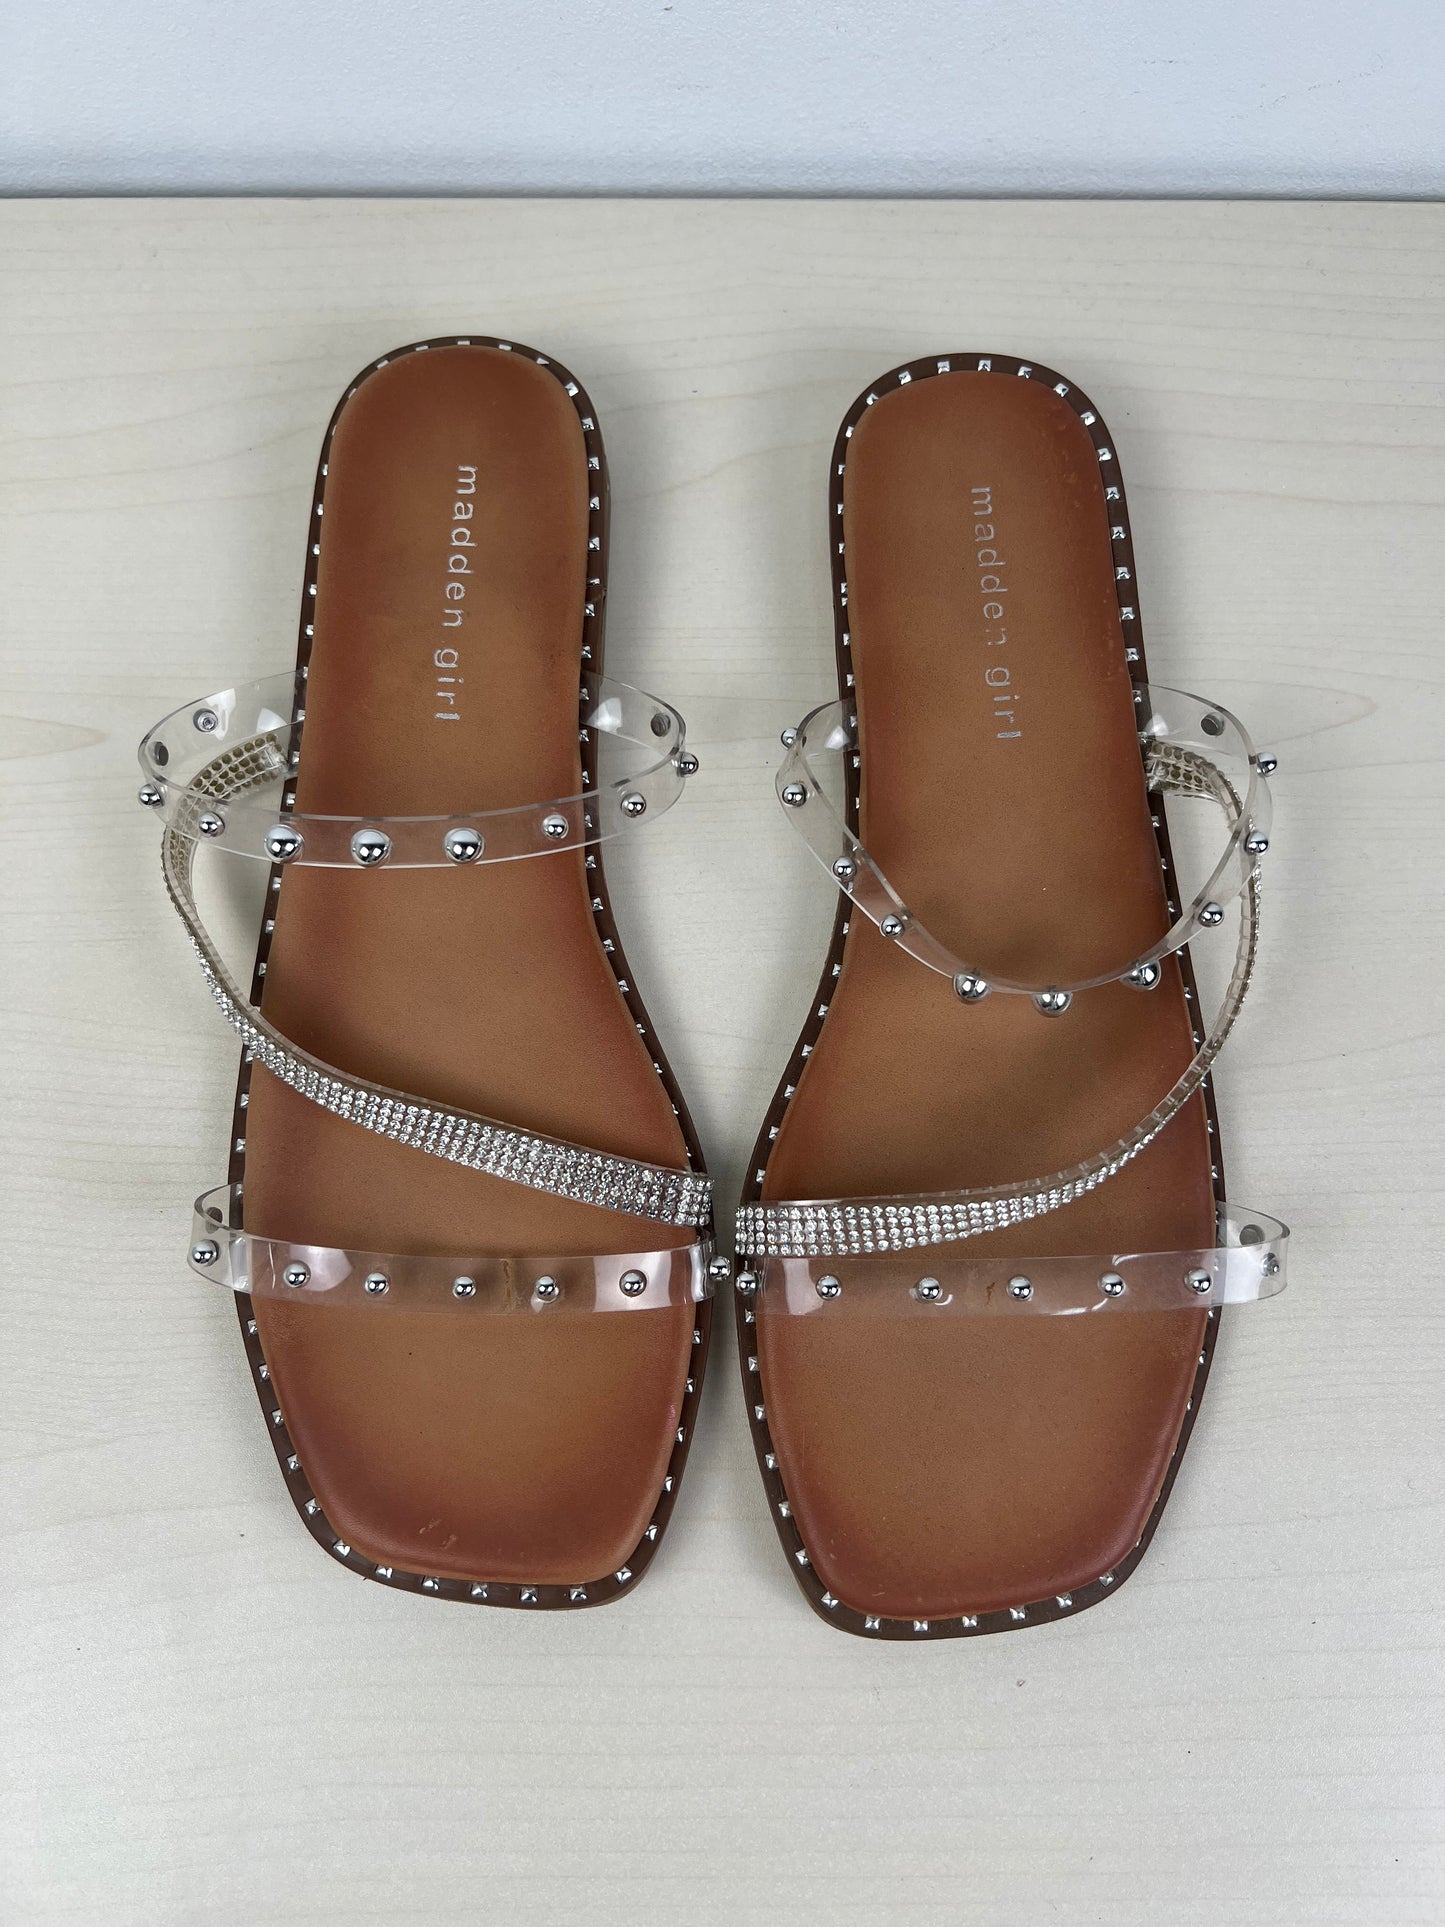 Sandals Flats By Madden Girl  Size: 8